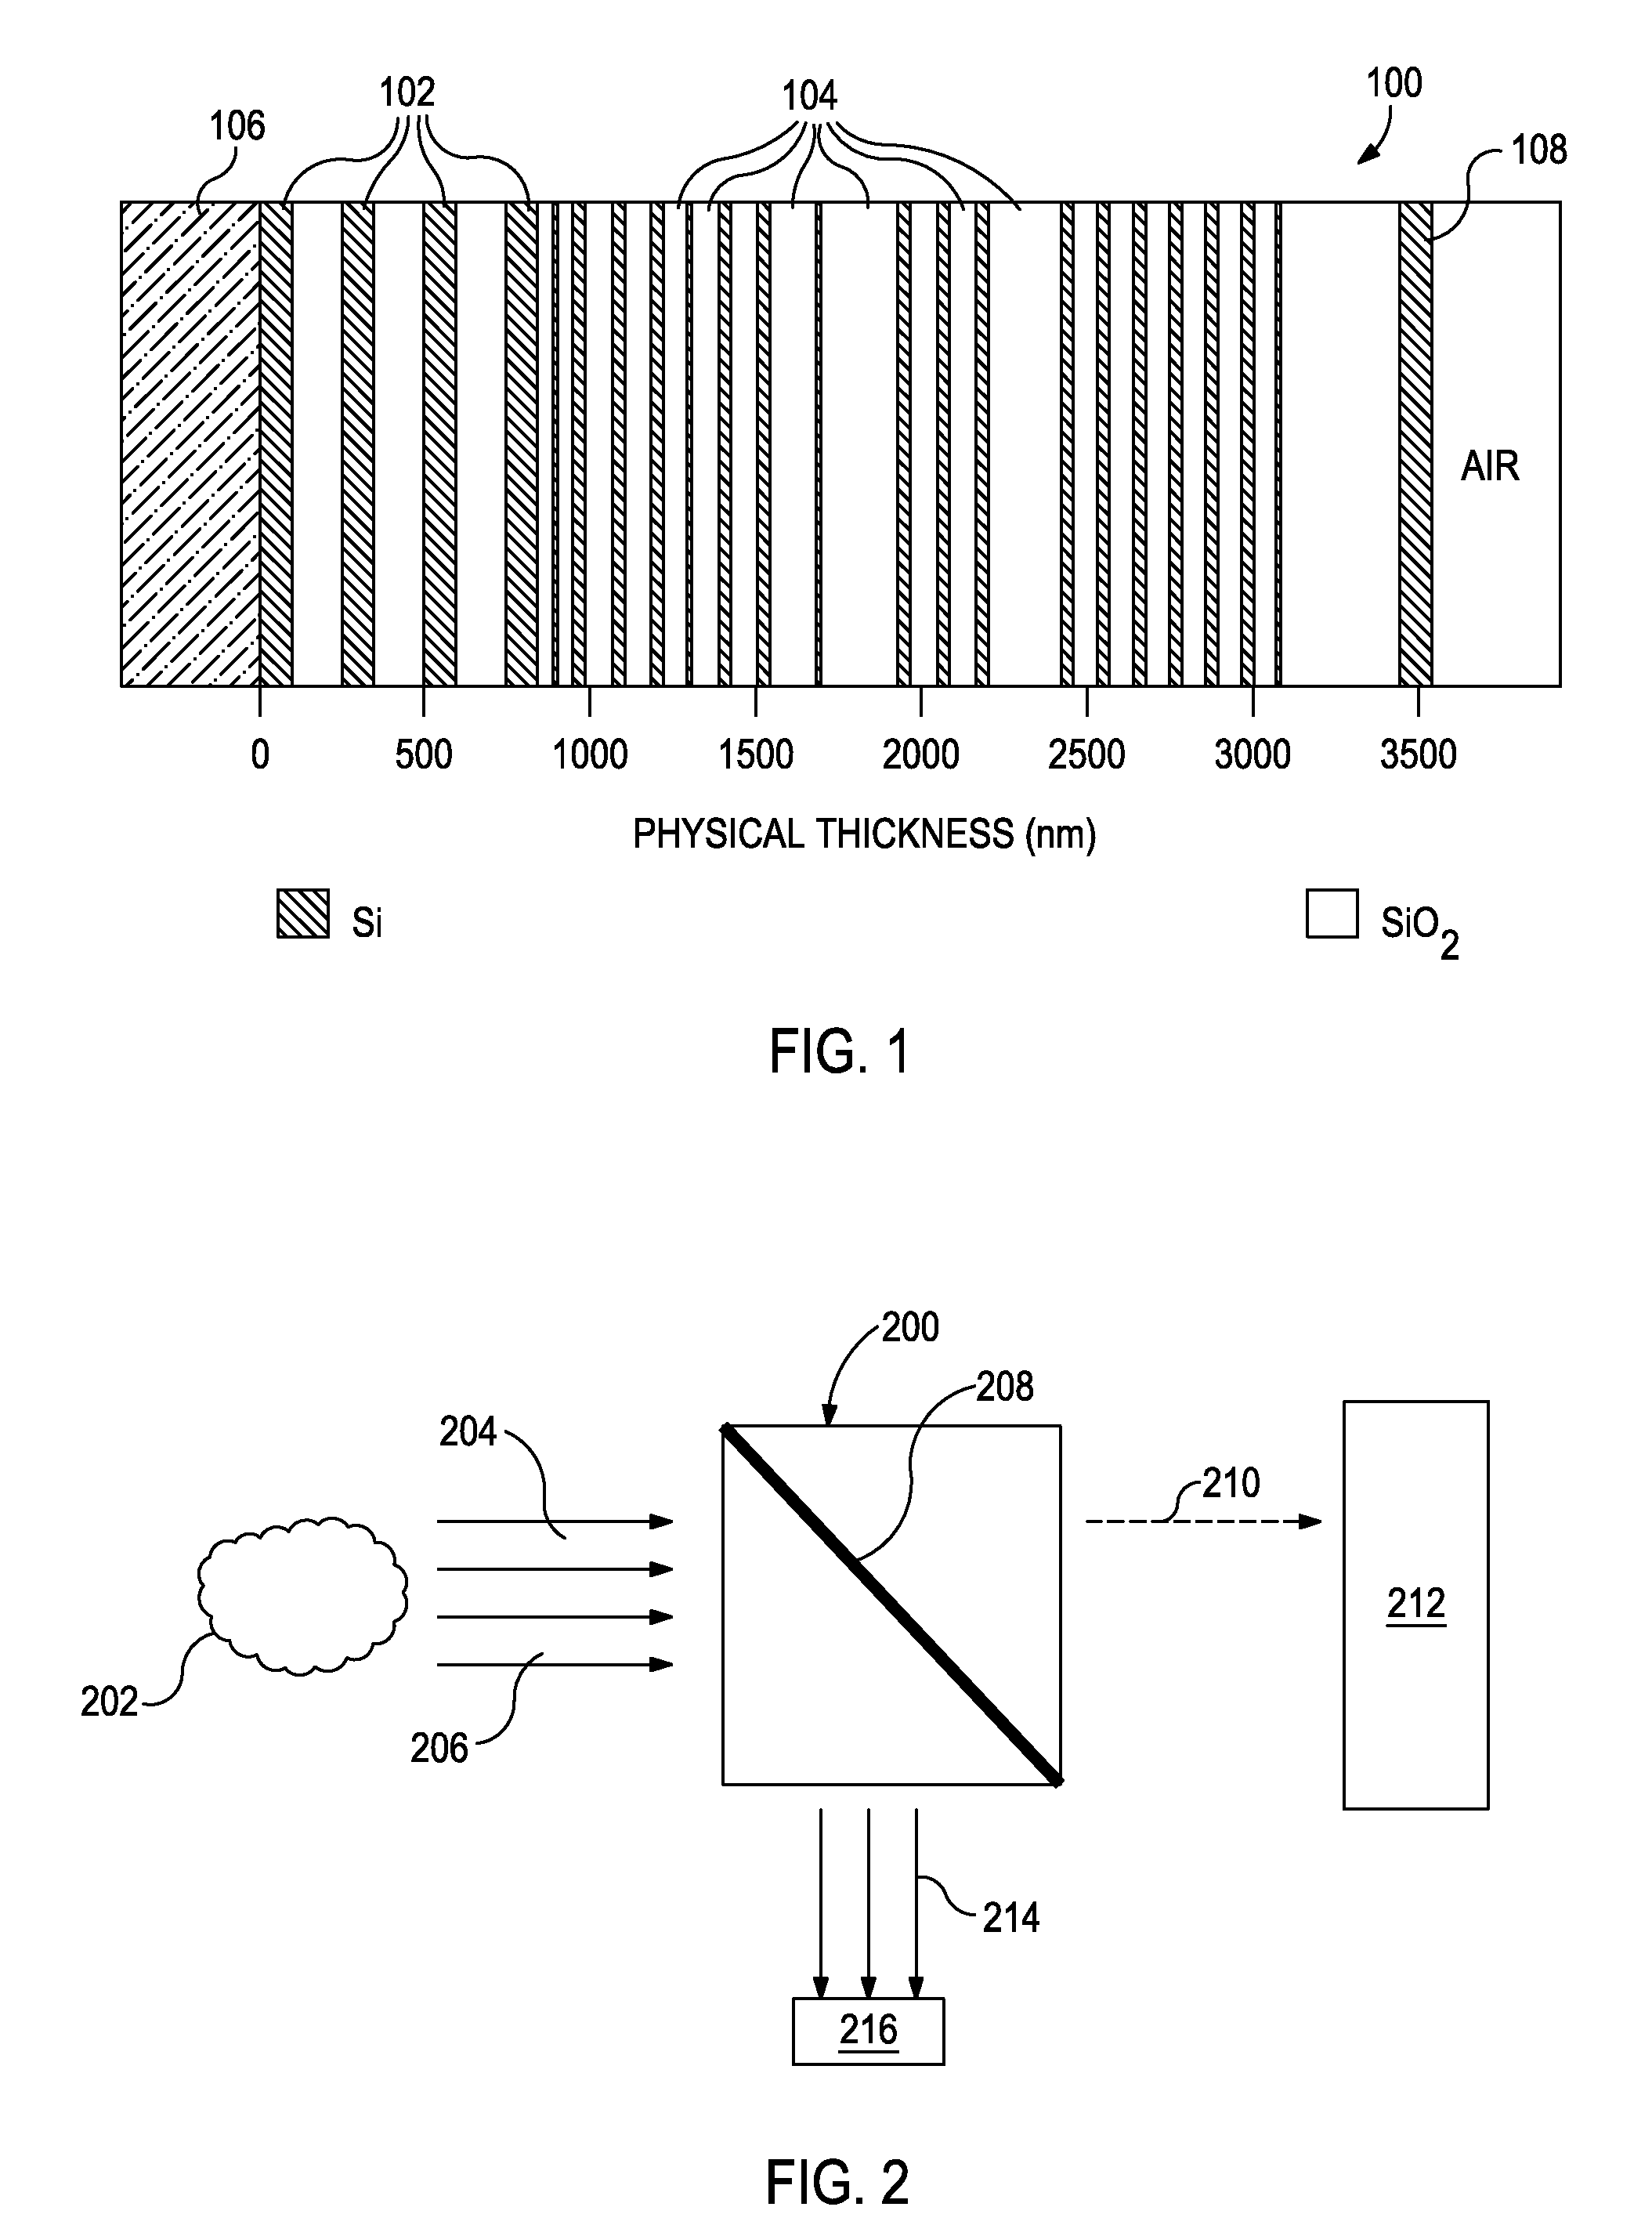 Systems and methods for inspecting and monitoring a pipeline